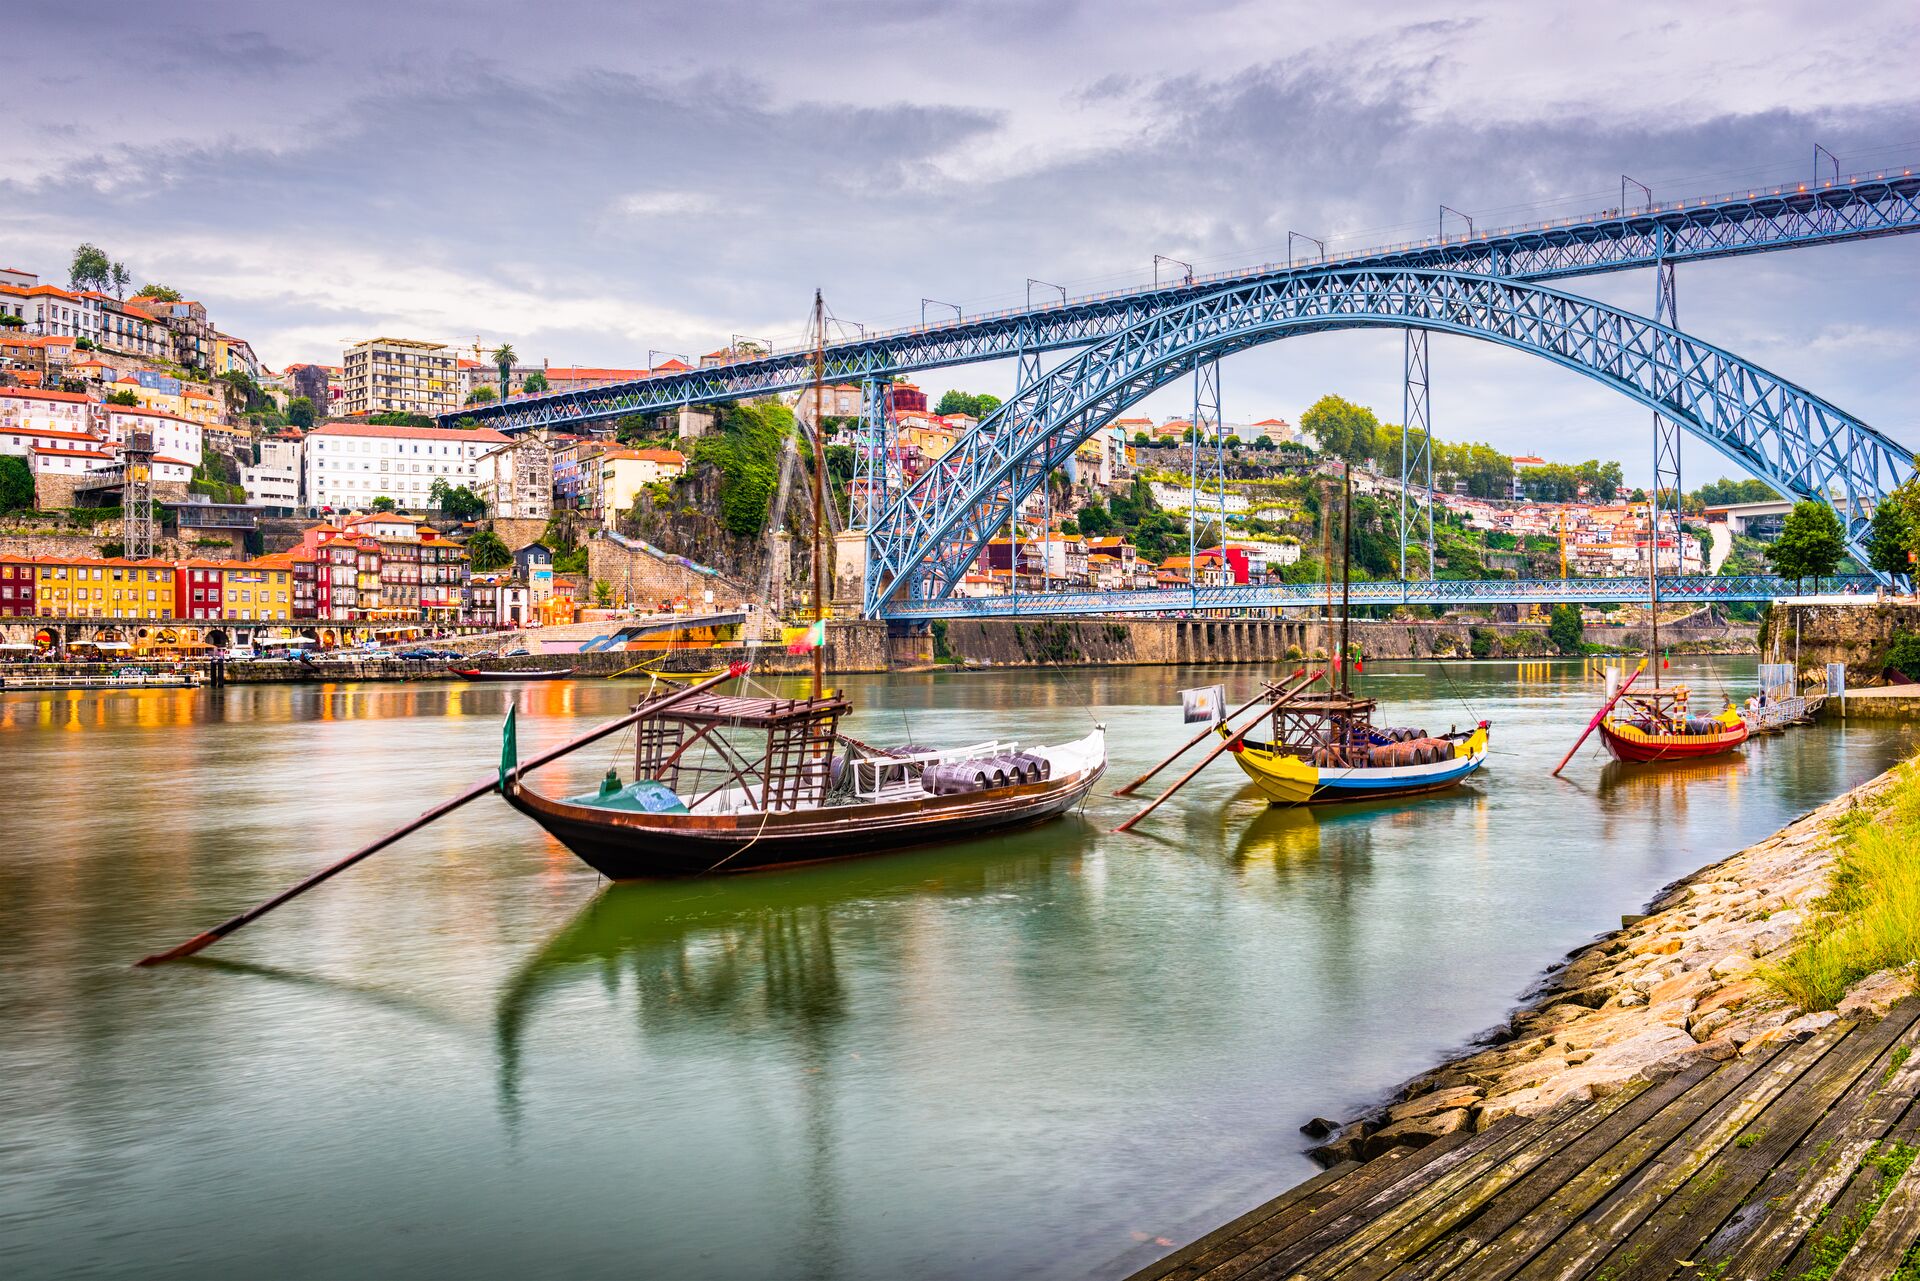 Boats in bright primary colours sit on the River Duoro in Porto, with a right blue bridge behind and colourful houses climbing the hillside in the background